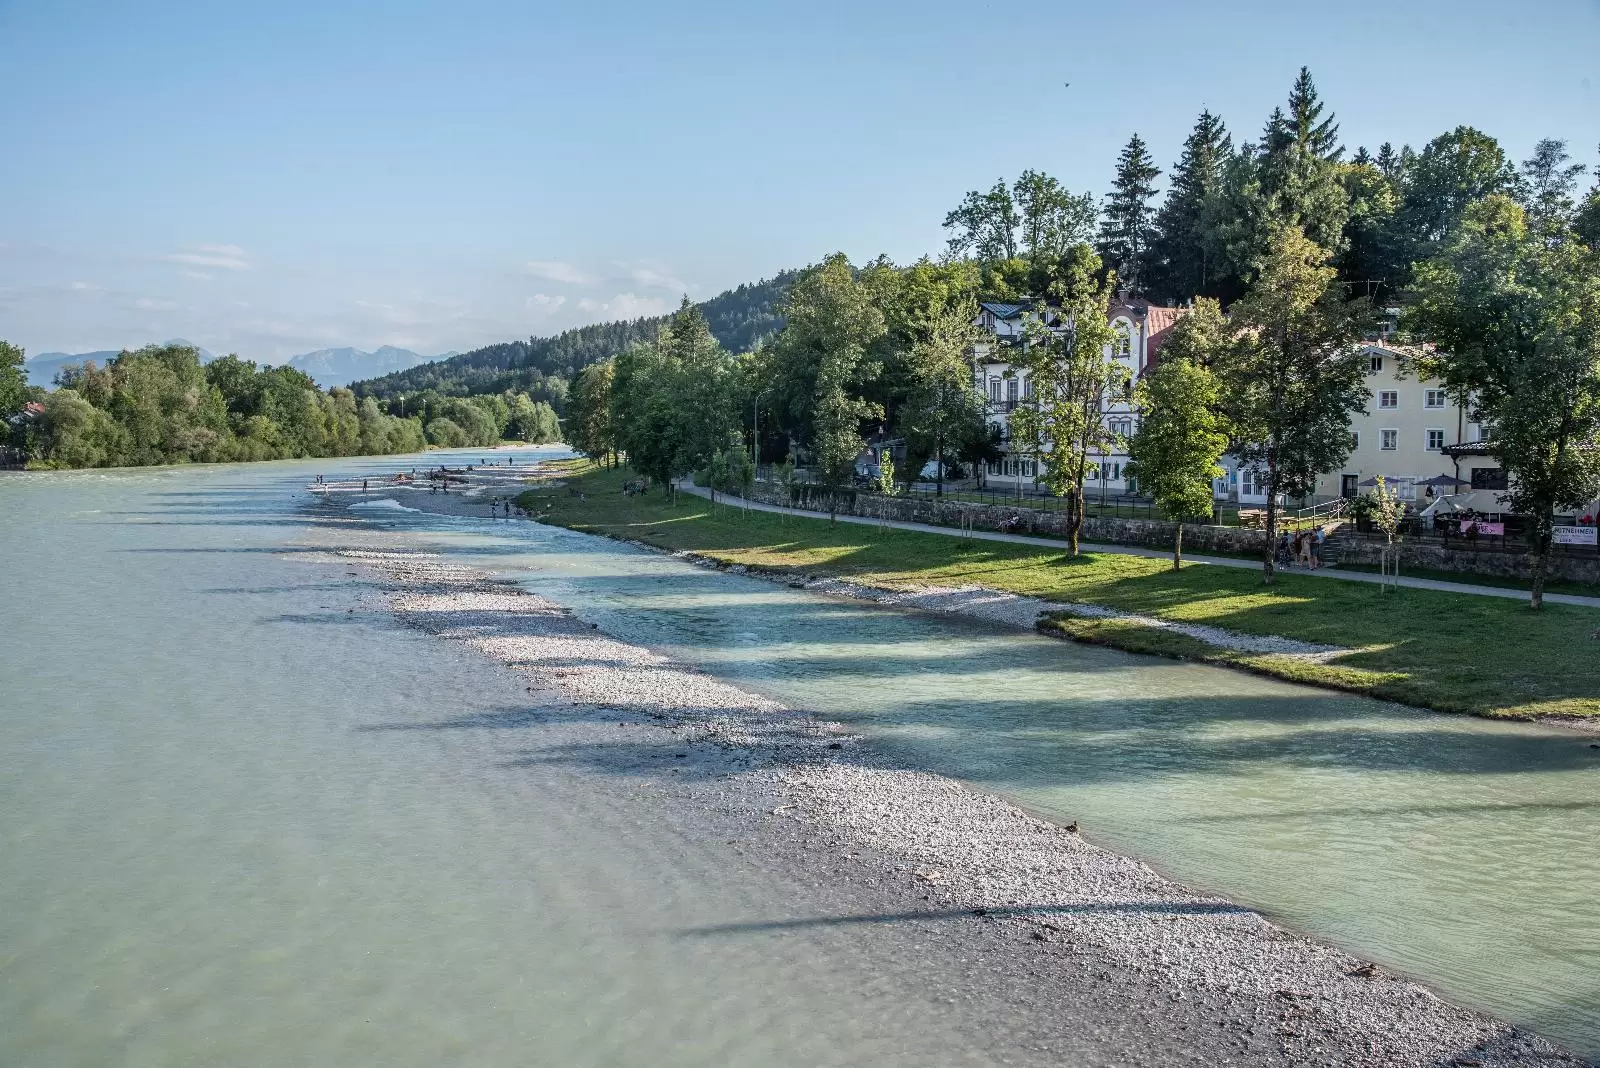 Bad Tölz banks of the Isar